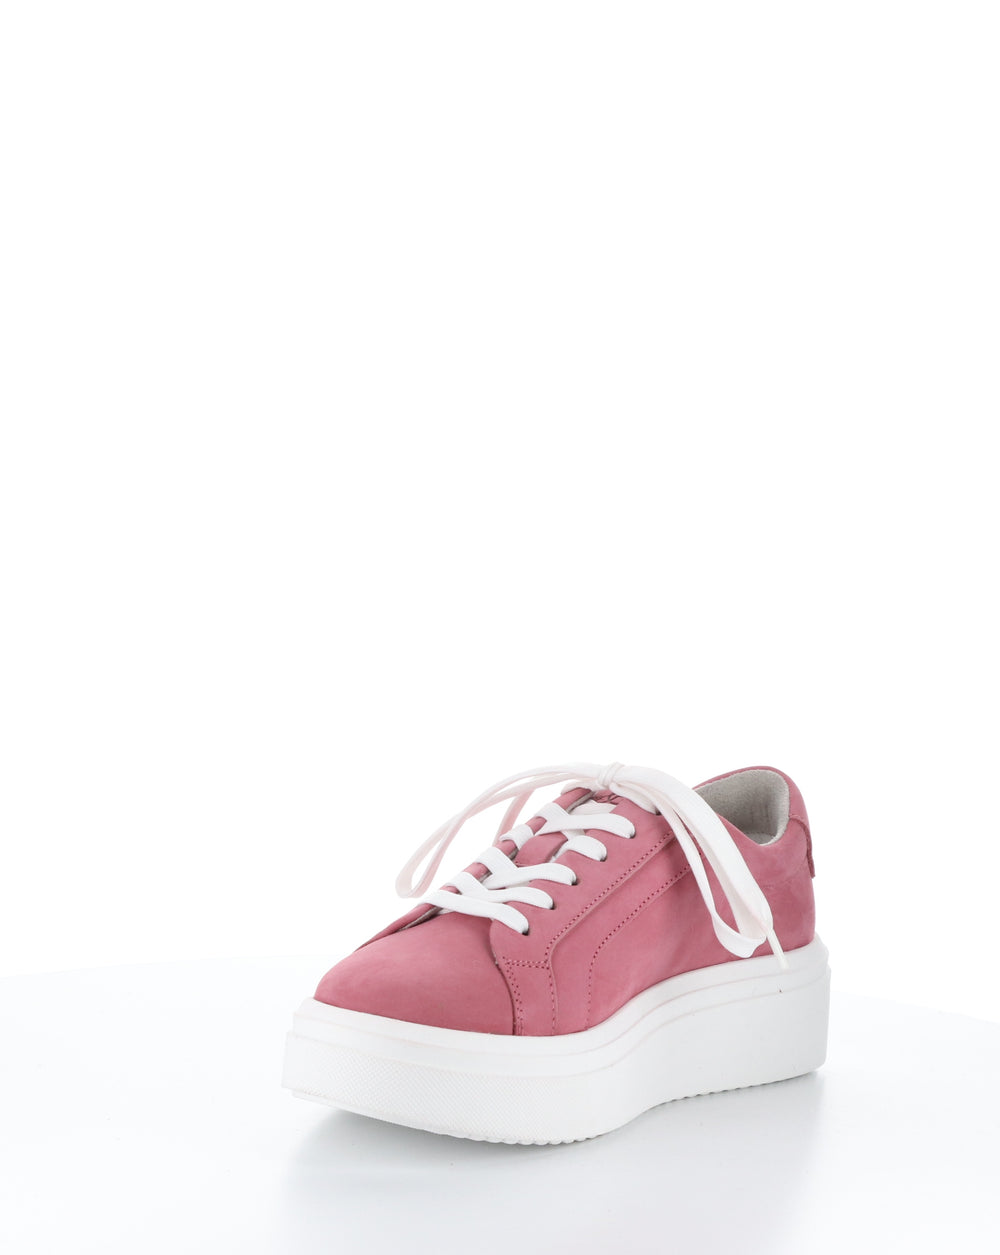 FLAVIA Rosey Lace-up Shoes